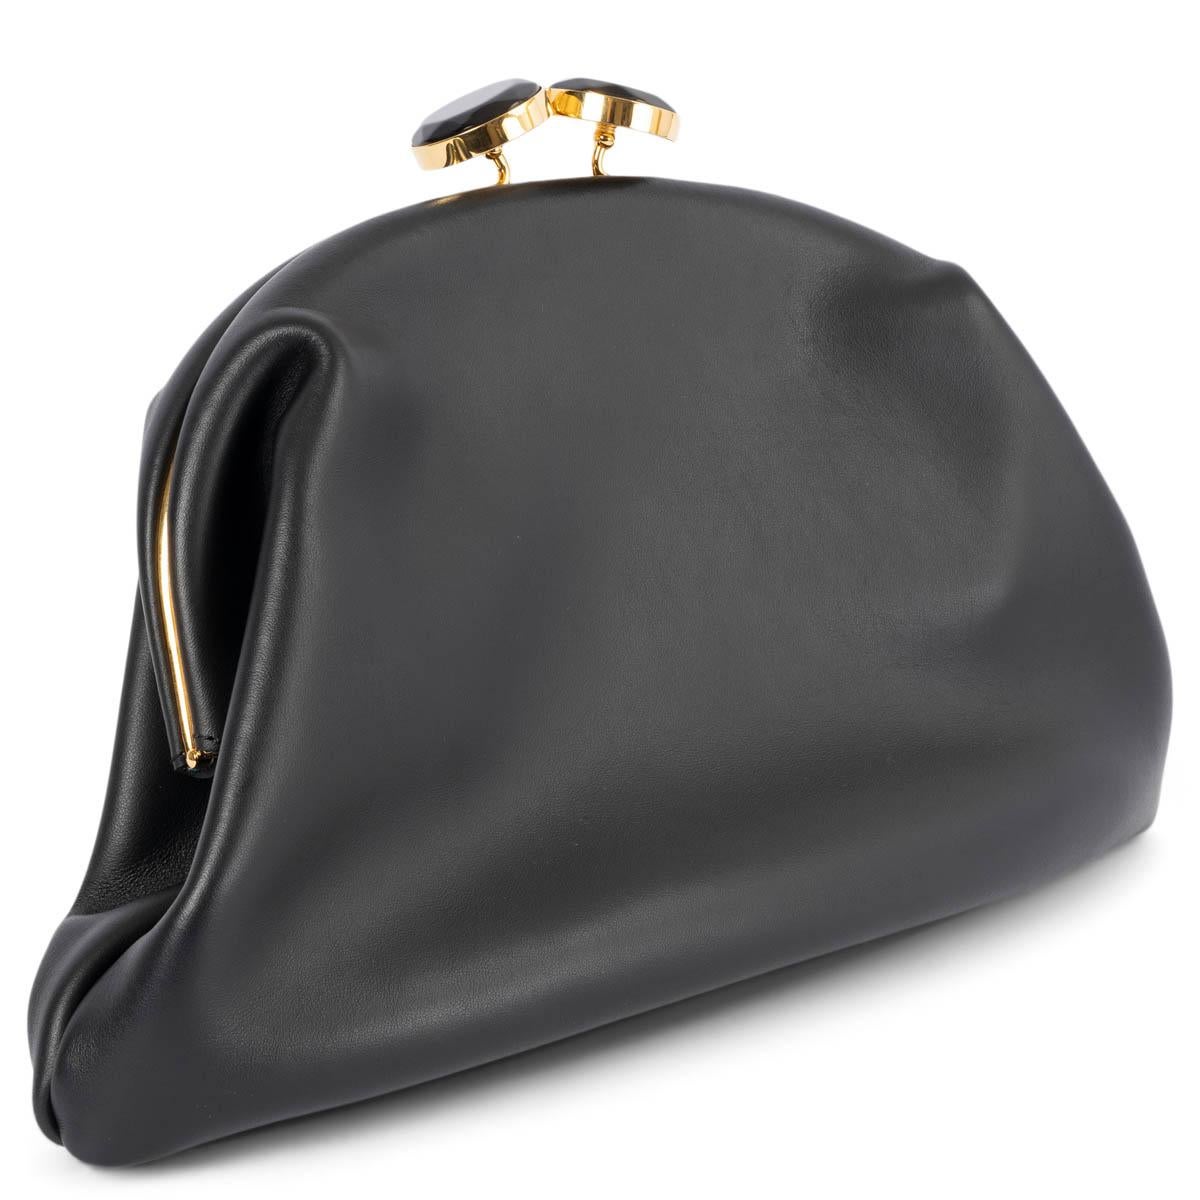 100% authentic Marni pouch clutch bag in Coal (black) smooth calfskin leather. Features a black rhinestone embellished and gold-tone kisslock closure. Lined in taupe suede with one separate zipper pouch. Has been carried and is in excellent